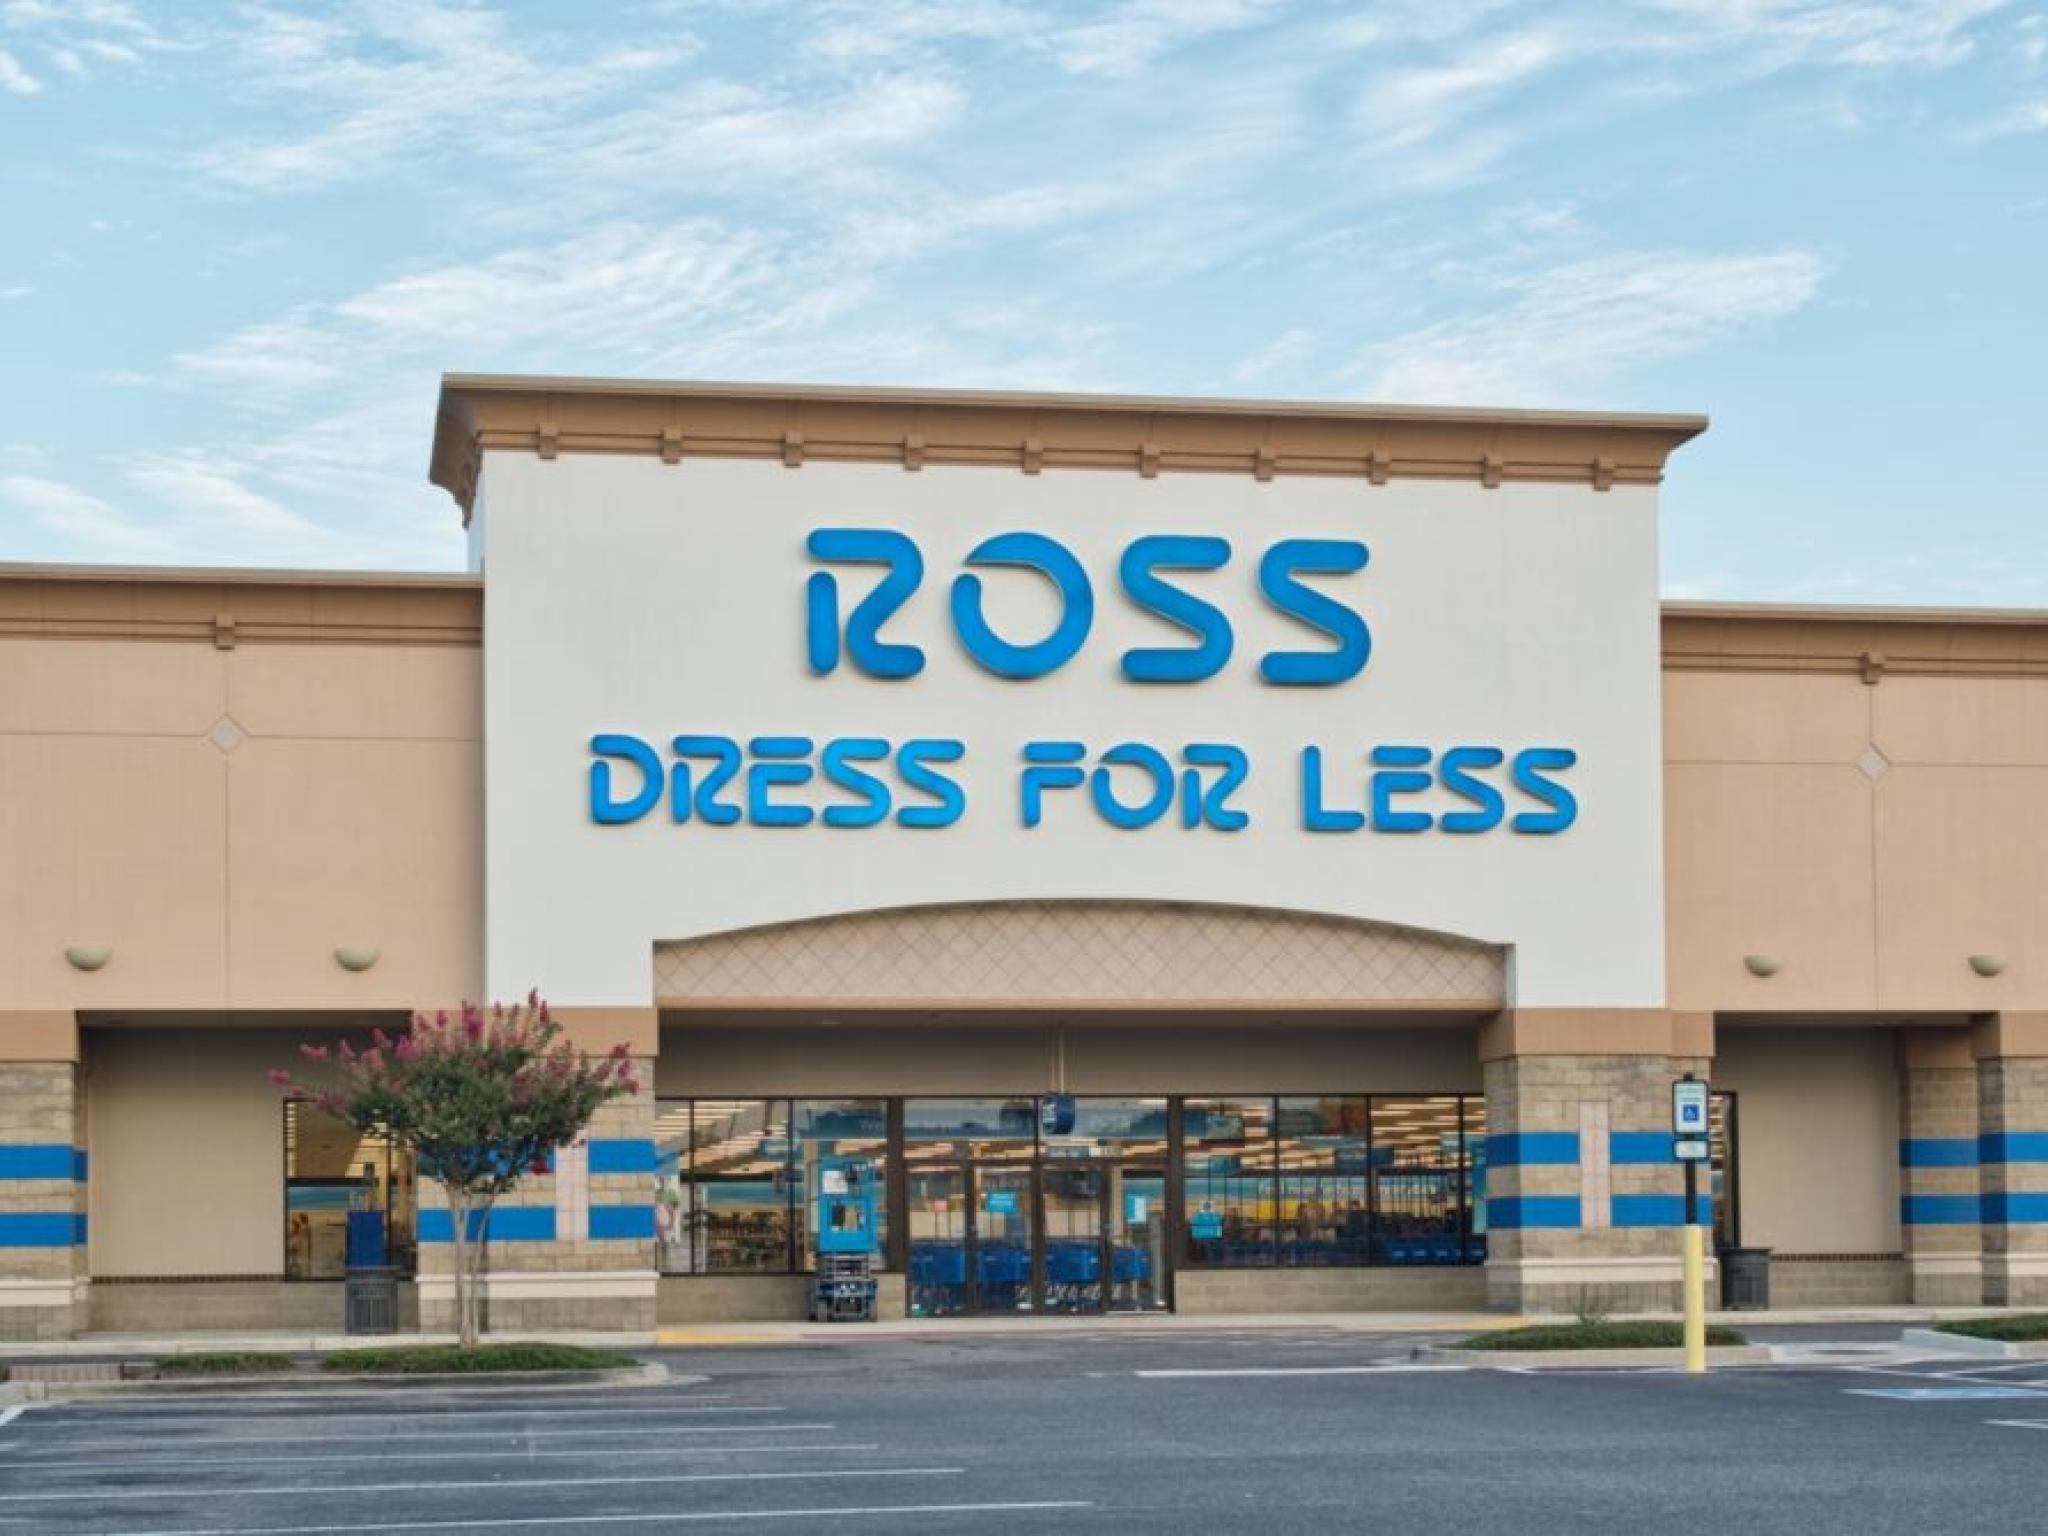  ross-stores-stock-jumps-on-q1-earnings-beat-key-metrics-stock-repurchase-and-more 